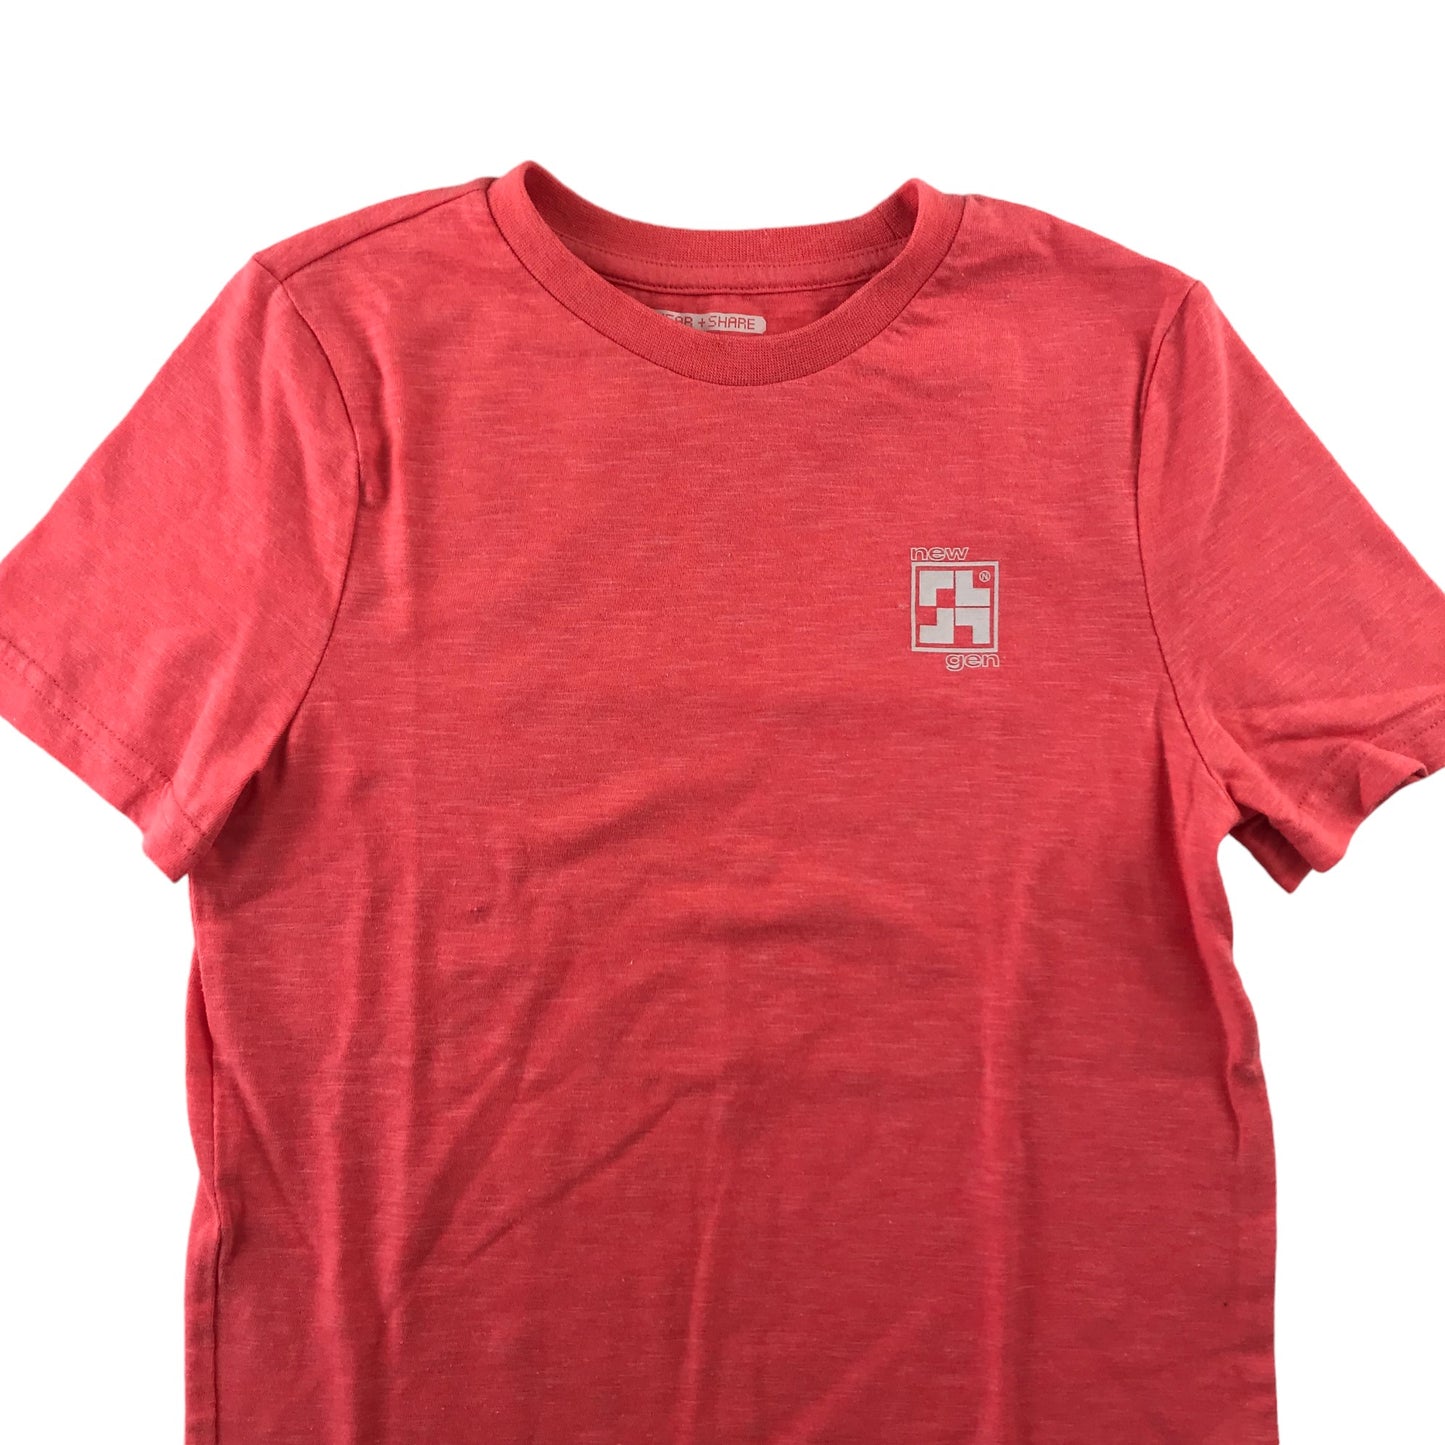 F&F T-shirt 7-8 years red plain gaming new gen